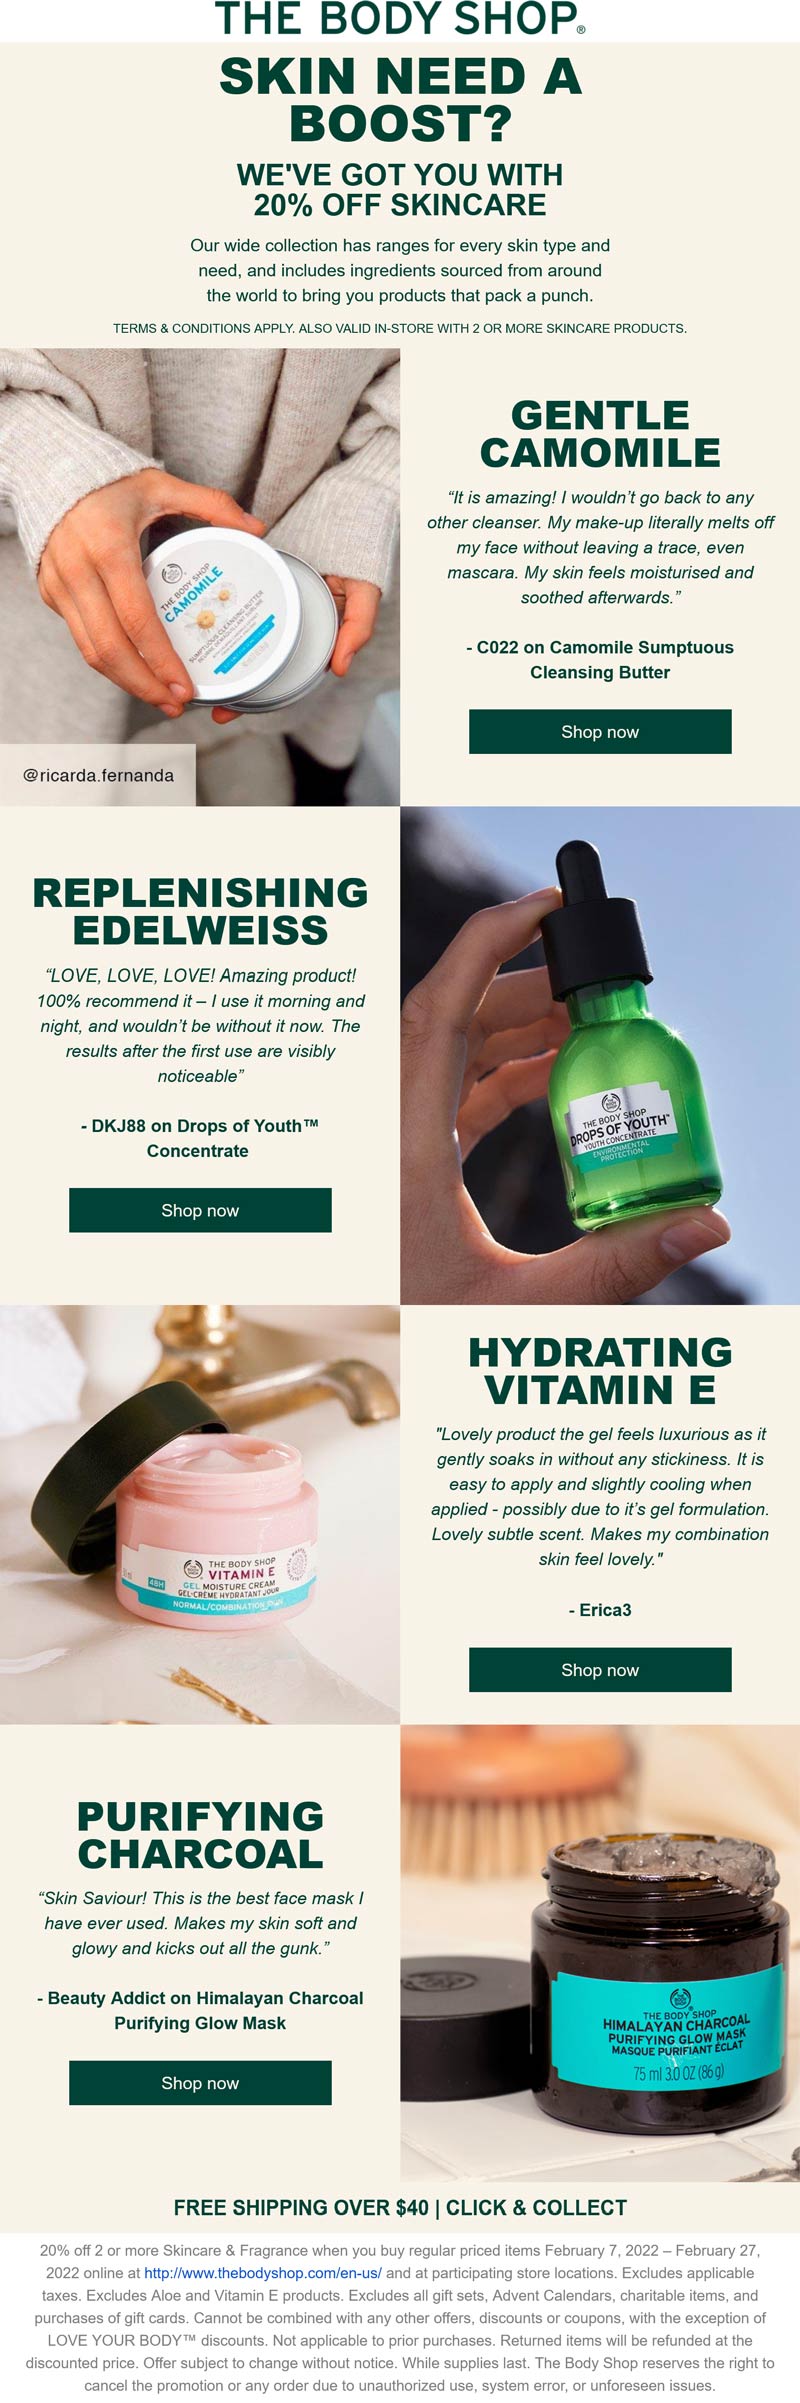 The Body Shop coupons & promo code for [December 2022]